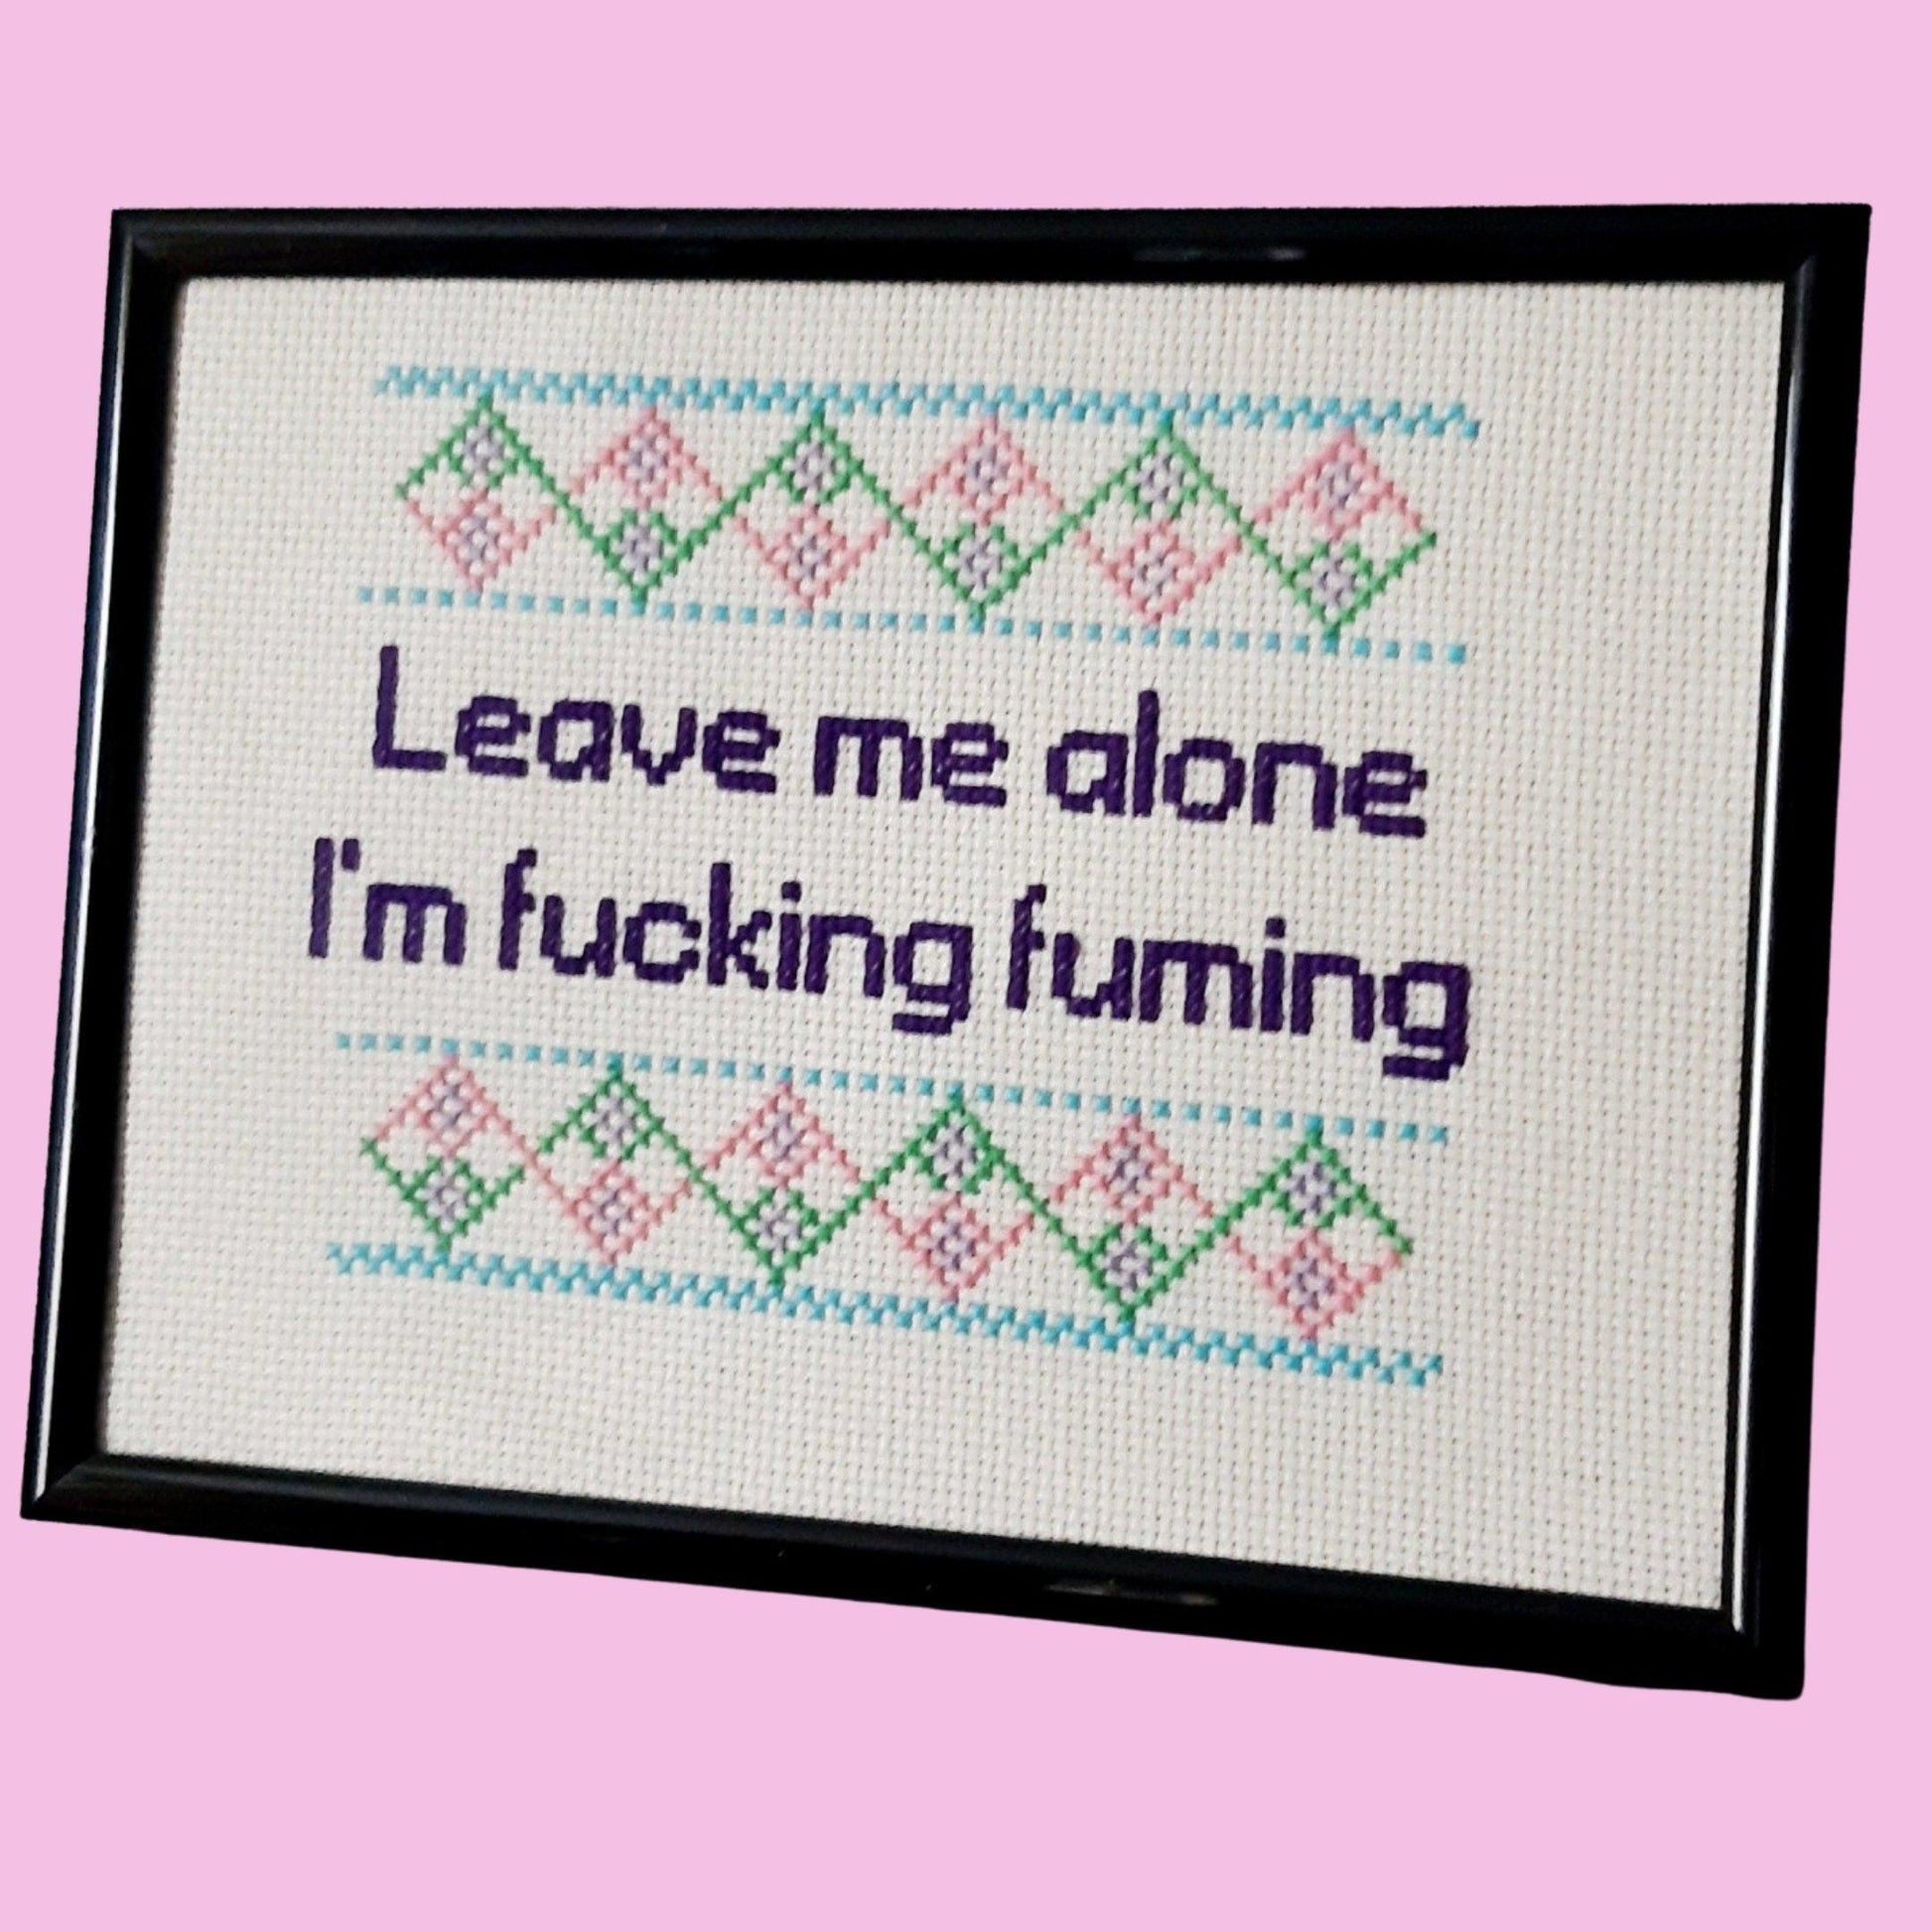 Completed cross stitch quote 'leave me alone I'm fucking fuming' mounted in narrow black frame